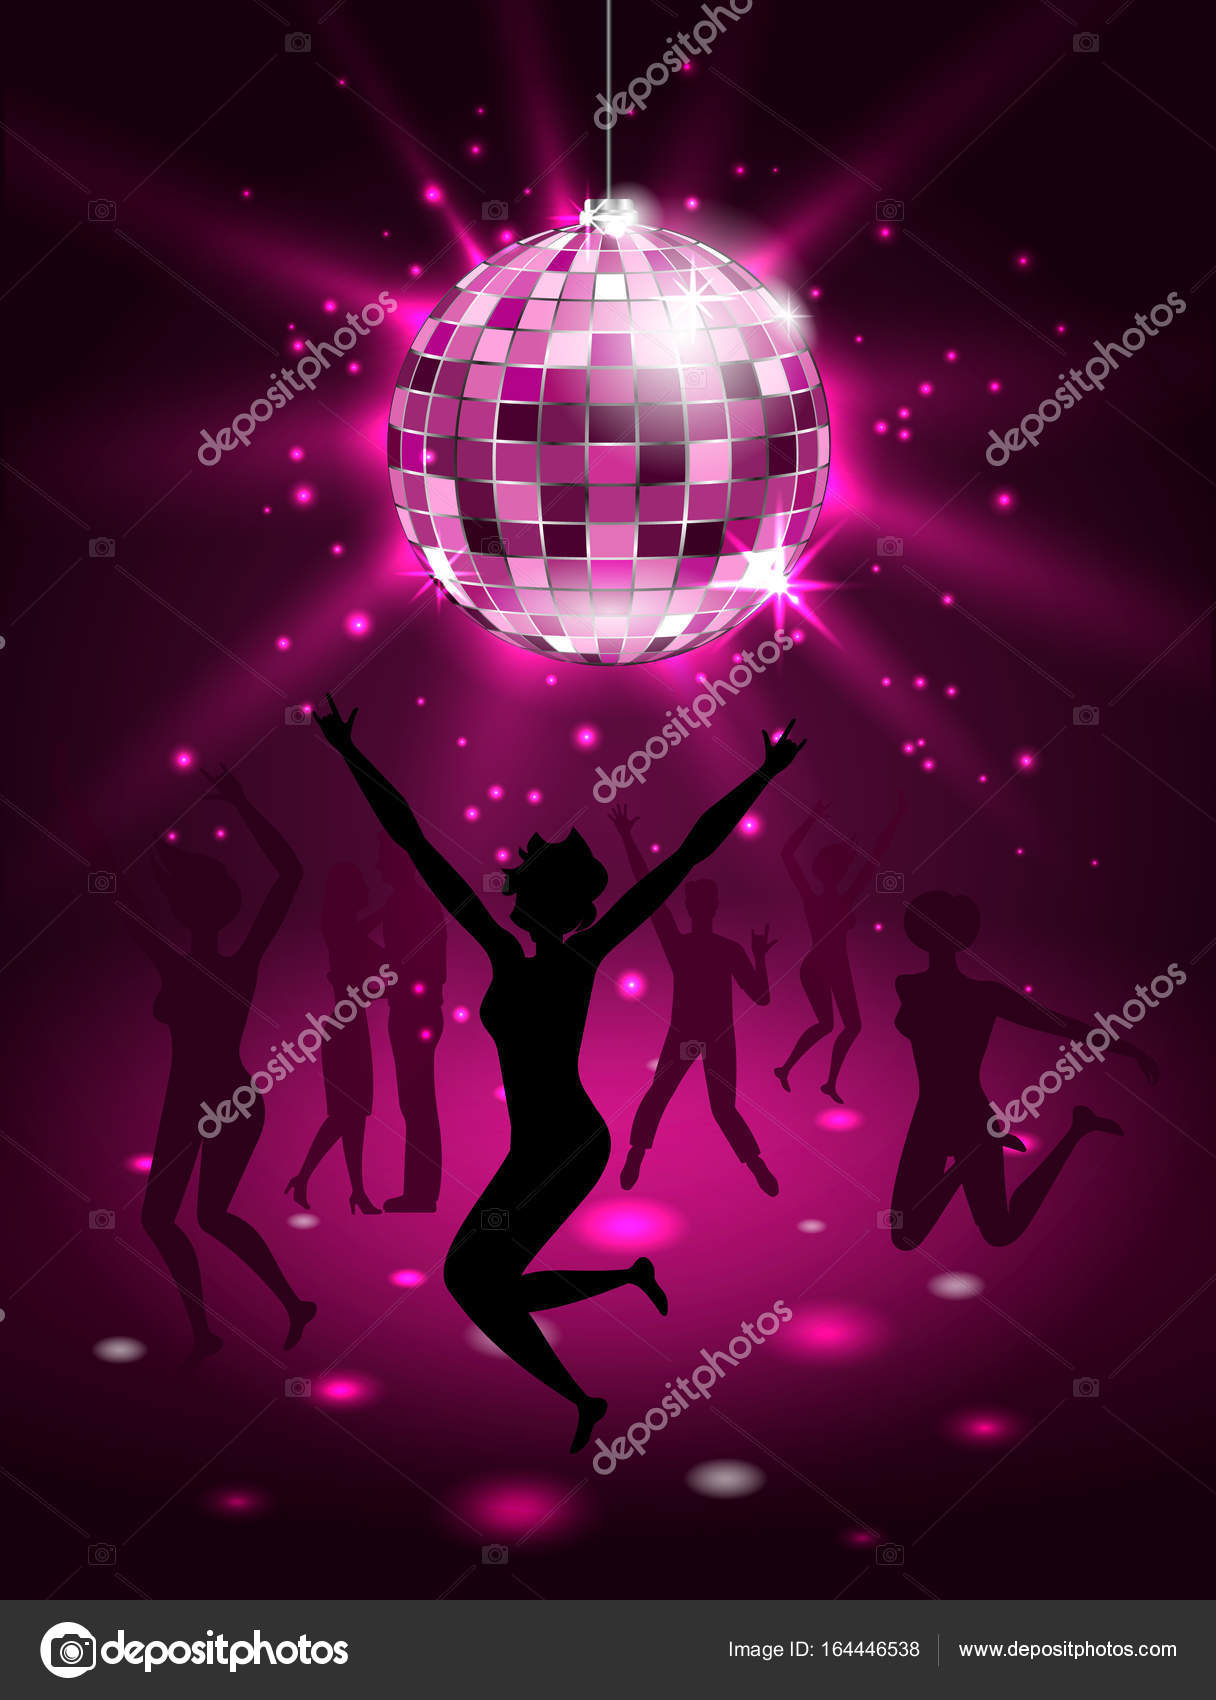 Silhouette People Dancing in Night-club, Disco Ball, Glitter Party ...